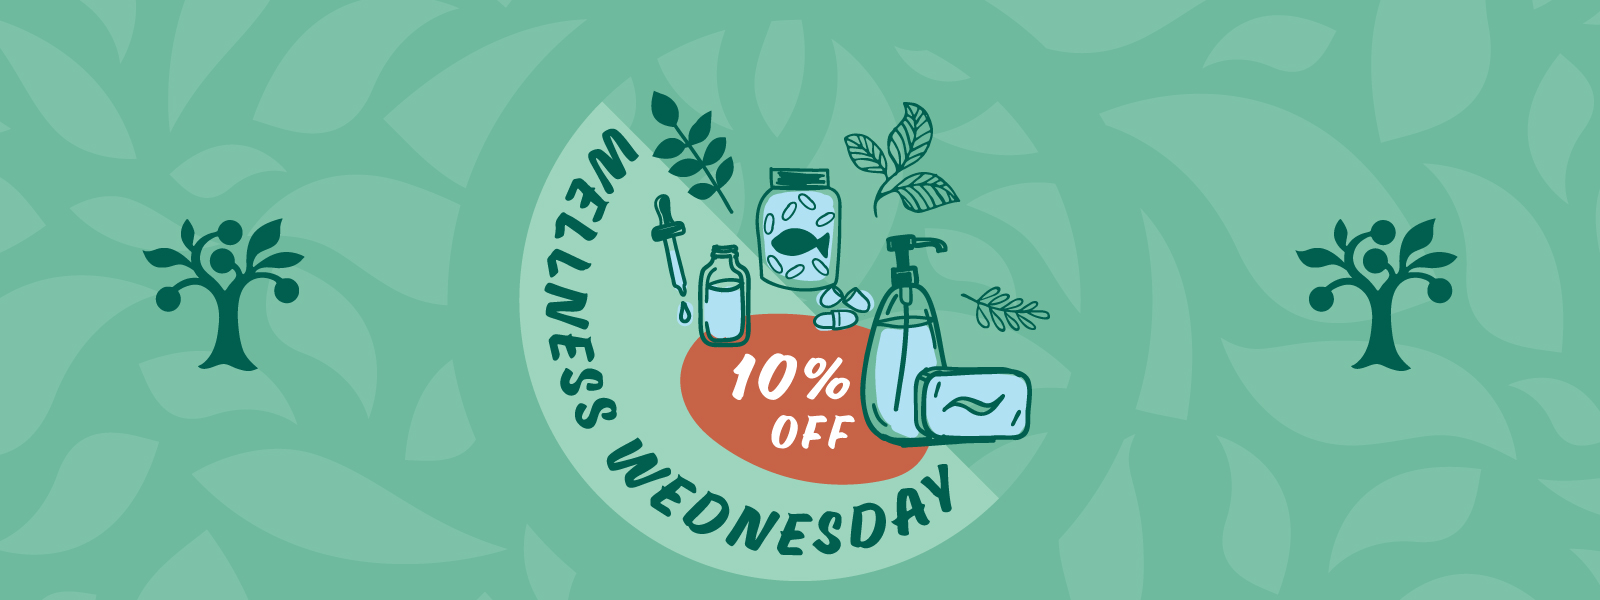 A graphic advertising the Wellness Wednesday sale